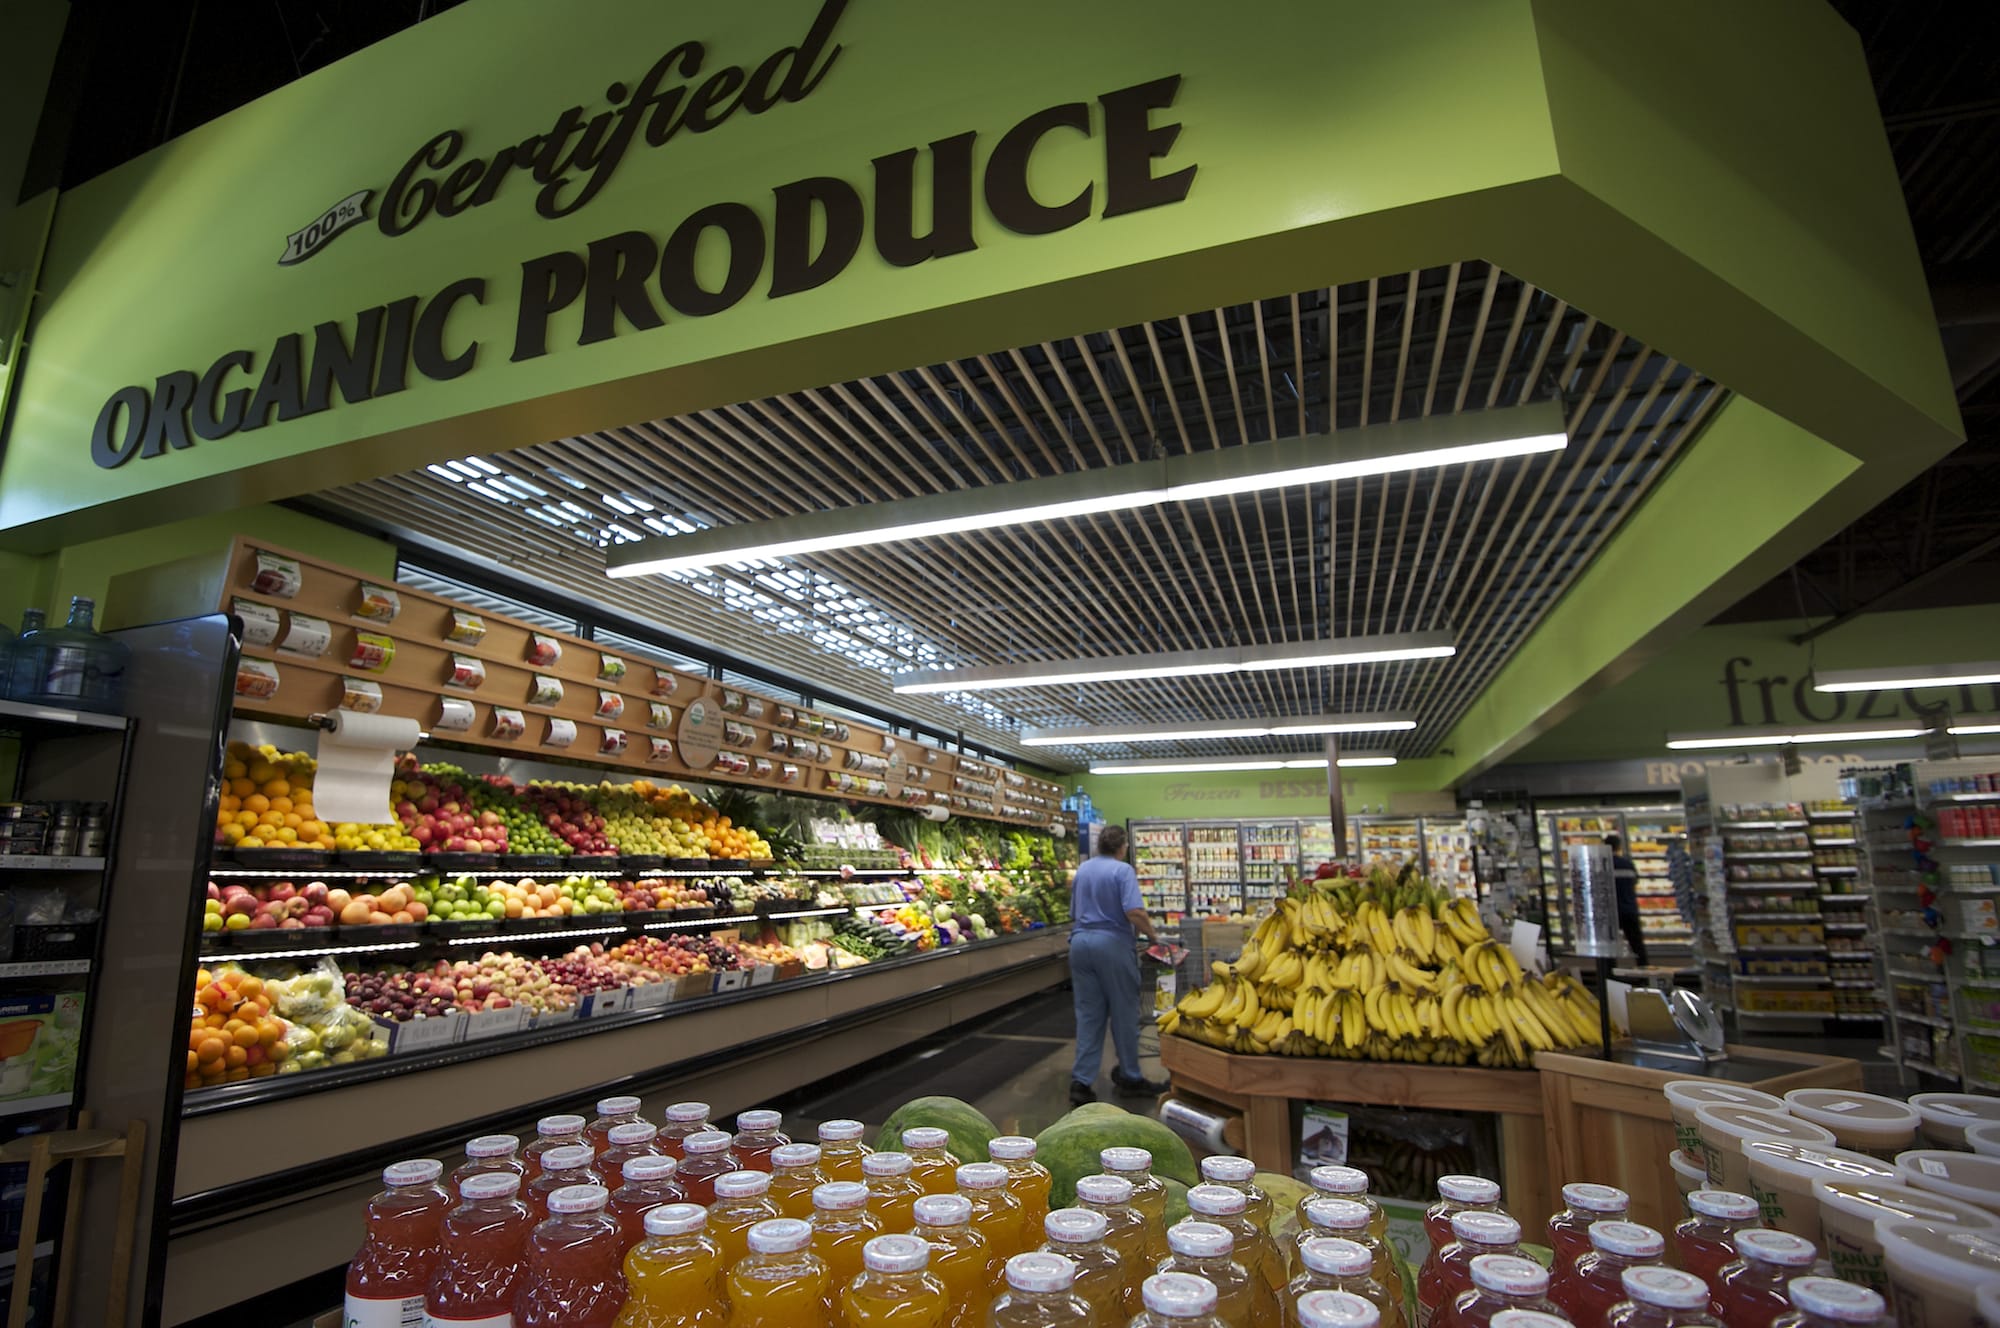 Organic food seller Natural Grocers will host a grand opening today for its newest 12,000-square-foot store -- and its first in Clark County -- now open for business in Hazel Dell.